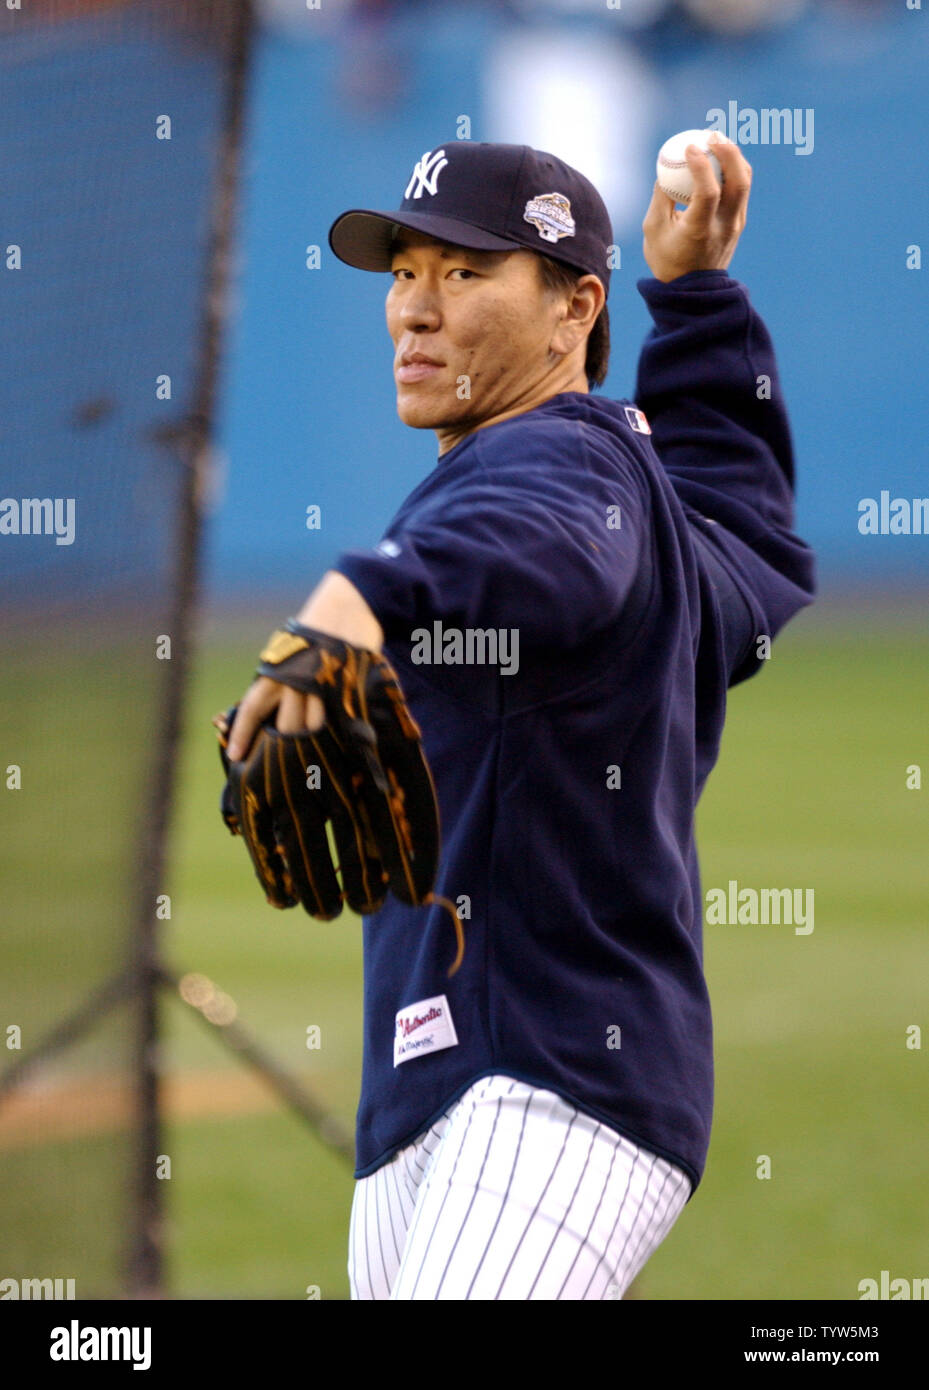 The New York Yankees' Hideki Matsui warms up before Game 1 of the World Series vs. the Florida Marlins at Yankee Stadium on October 18, 2003.   (UPI/Roger L. Wollenberg) Stock Photo